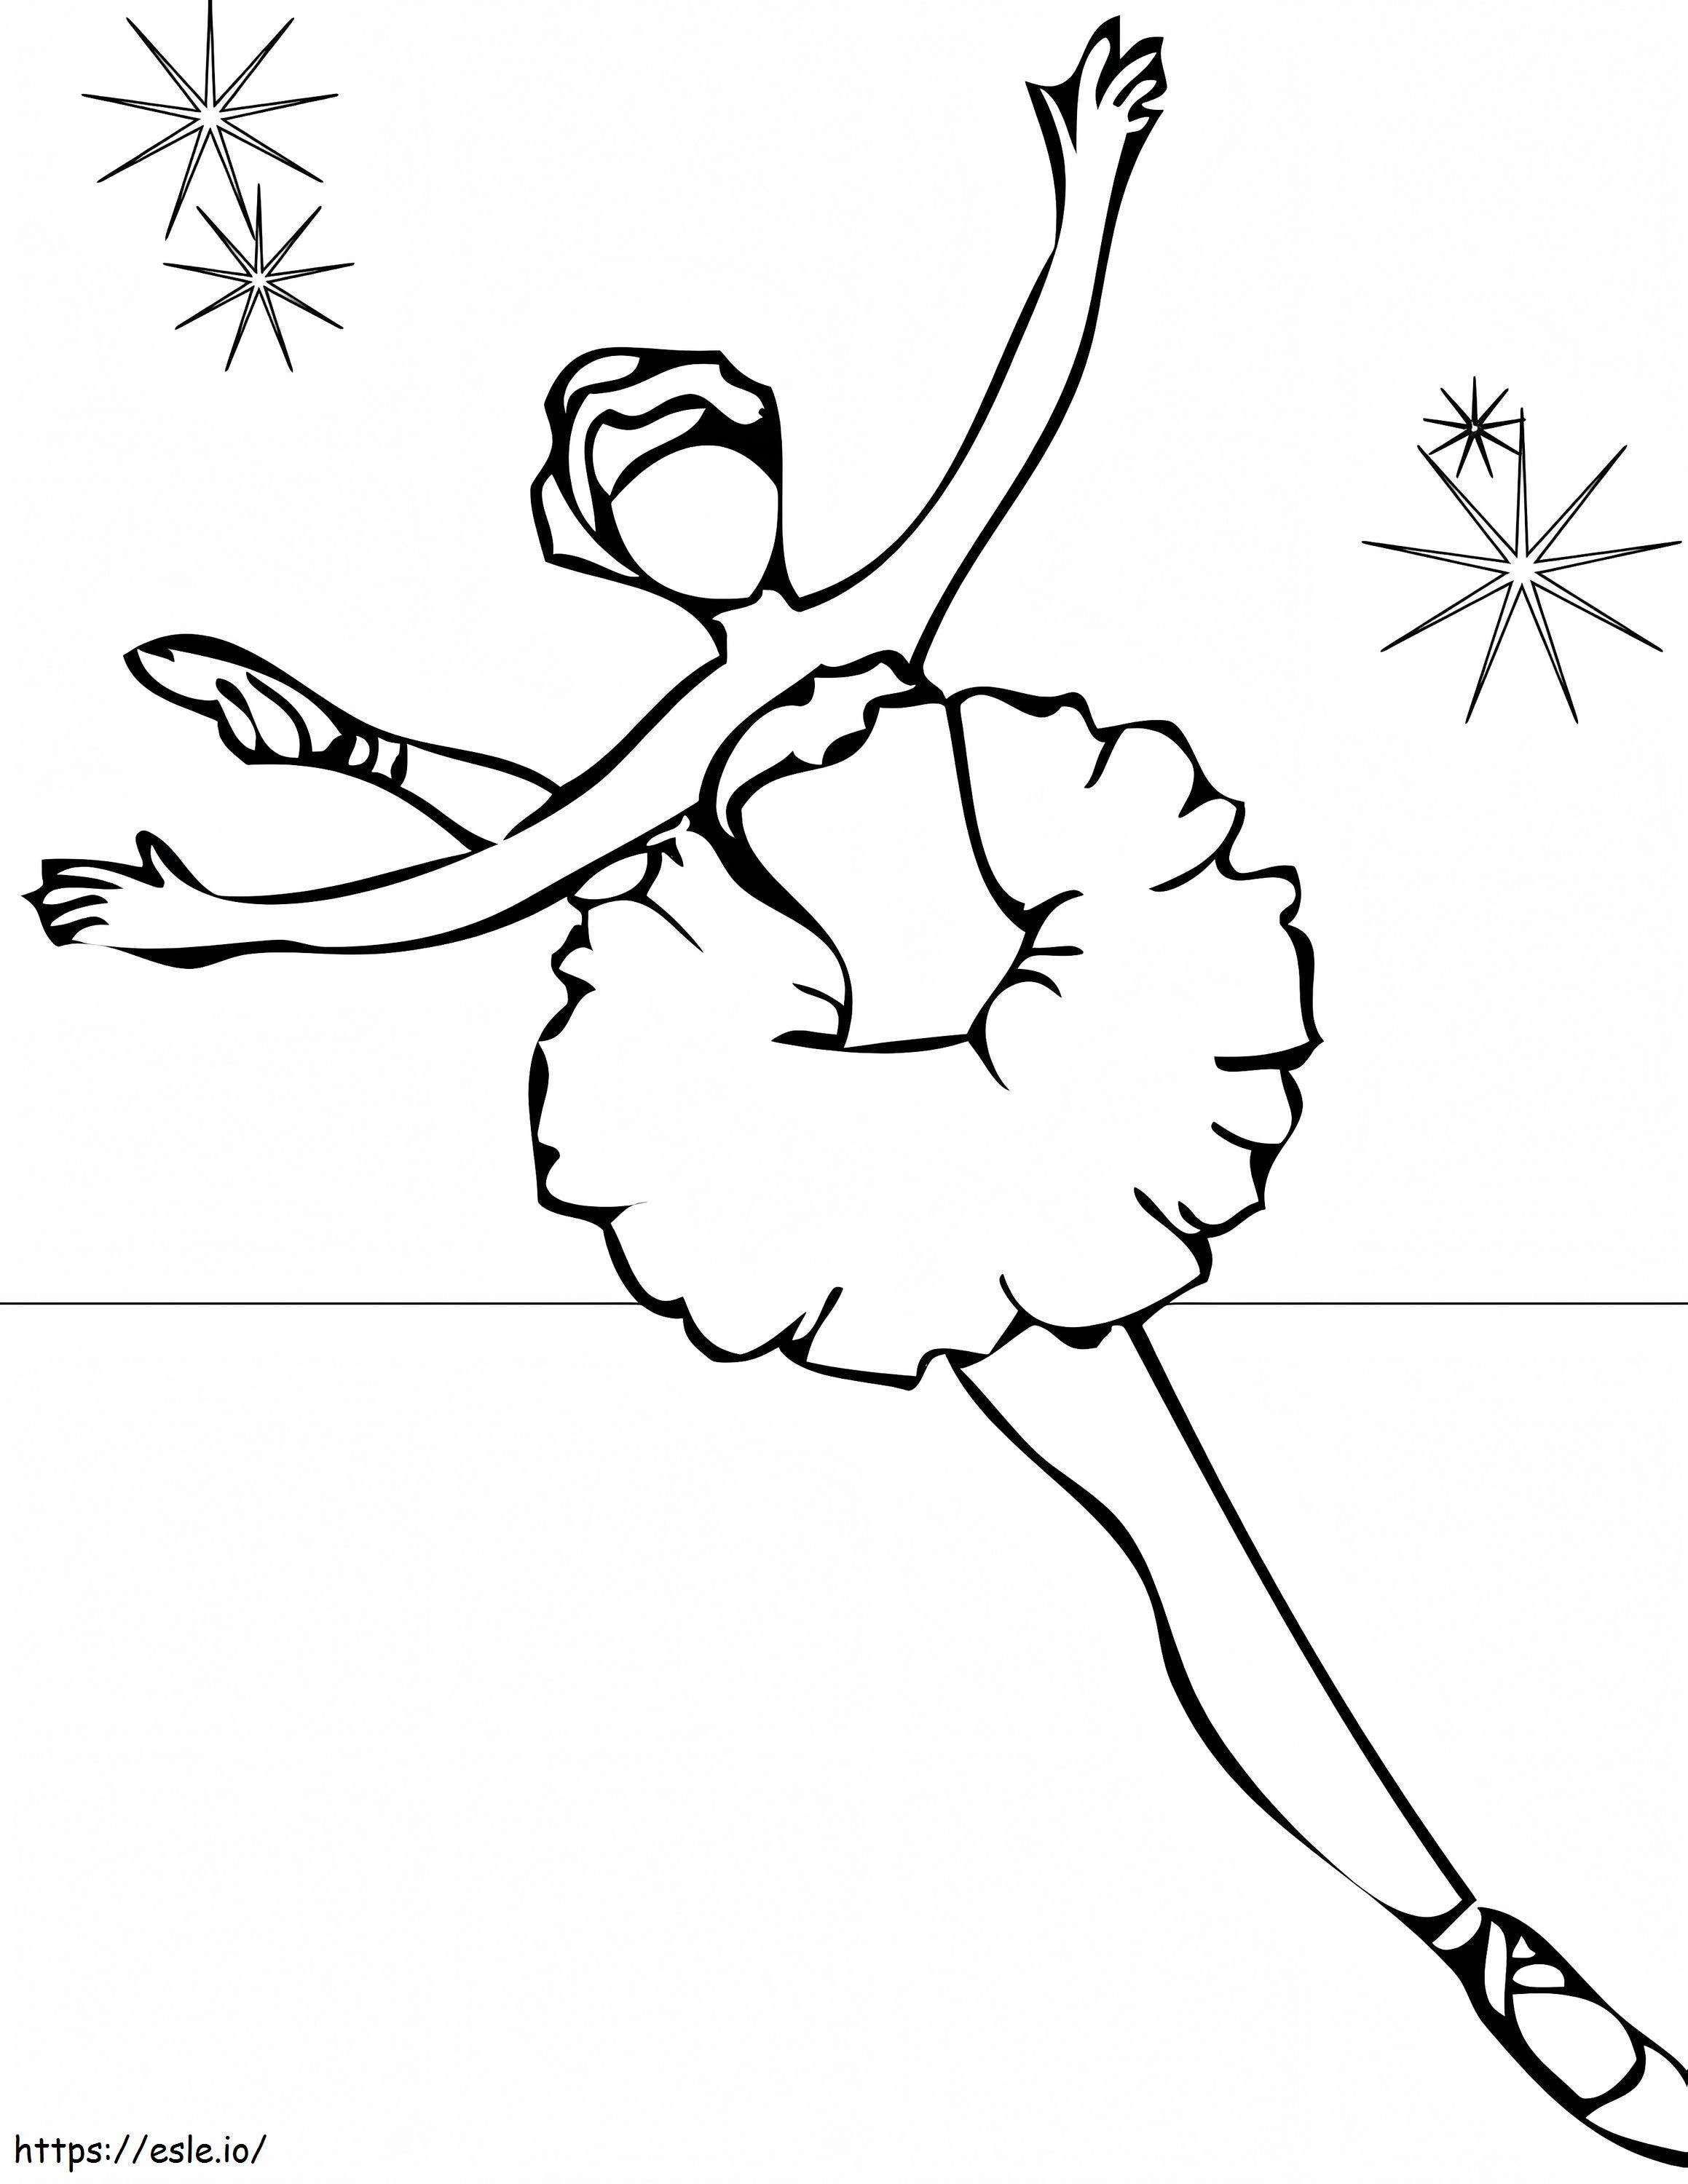 Ballet 1 coloring page